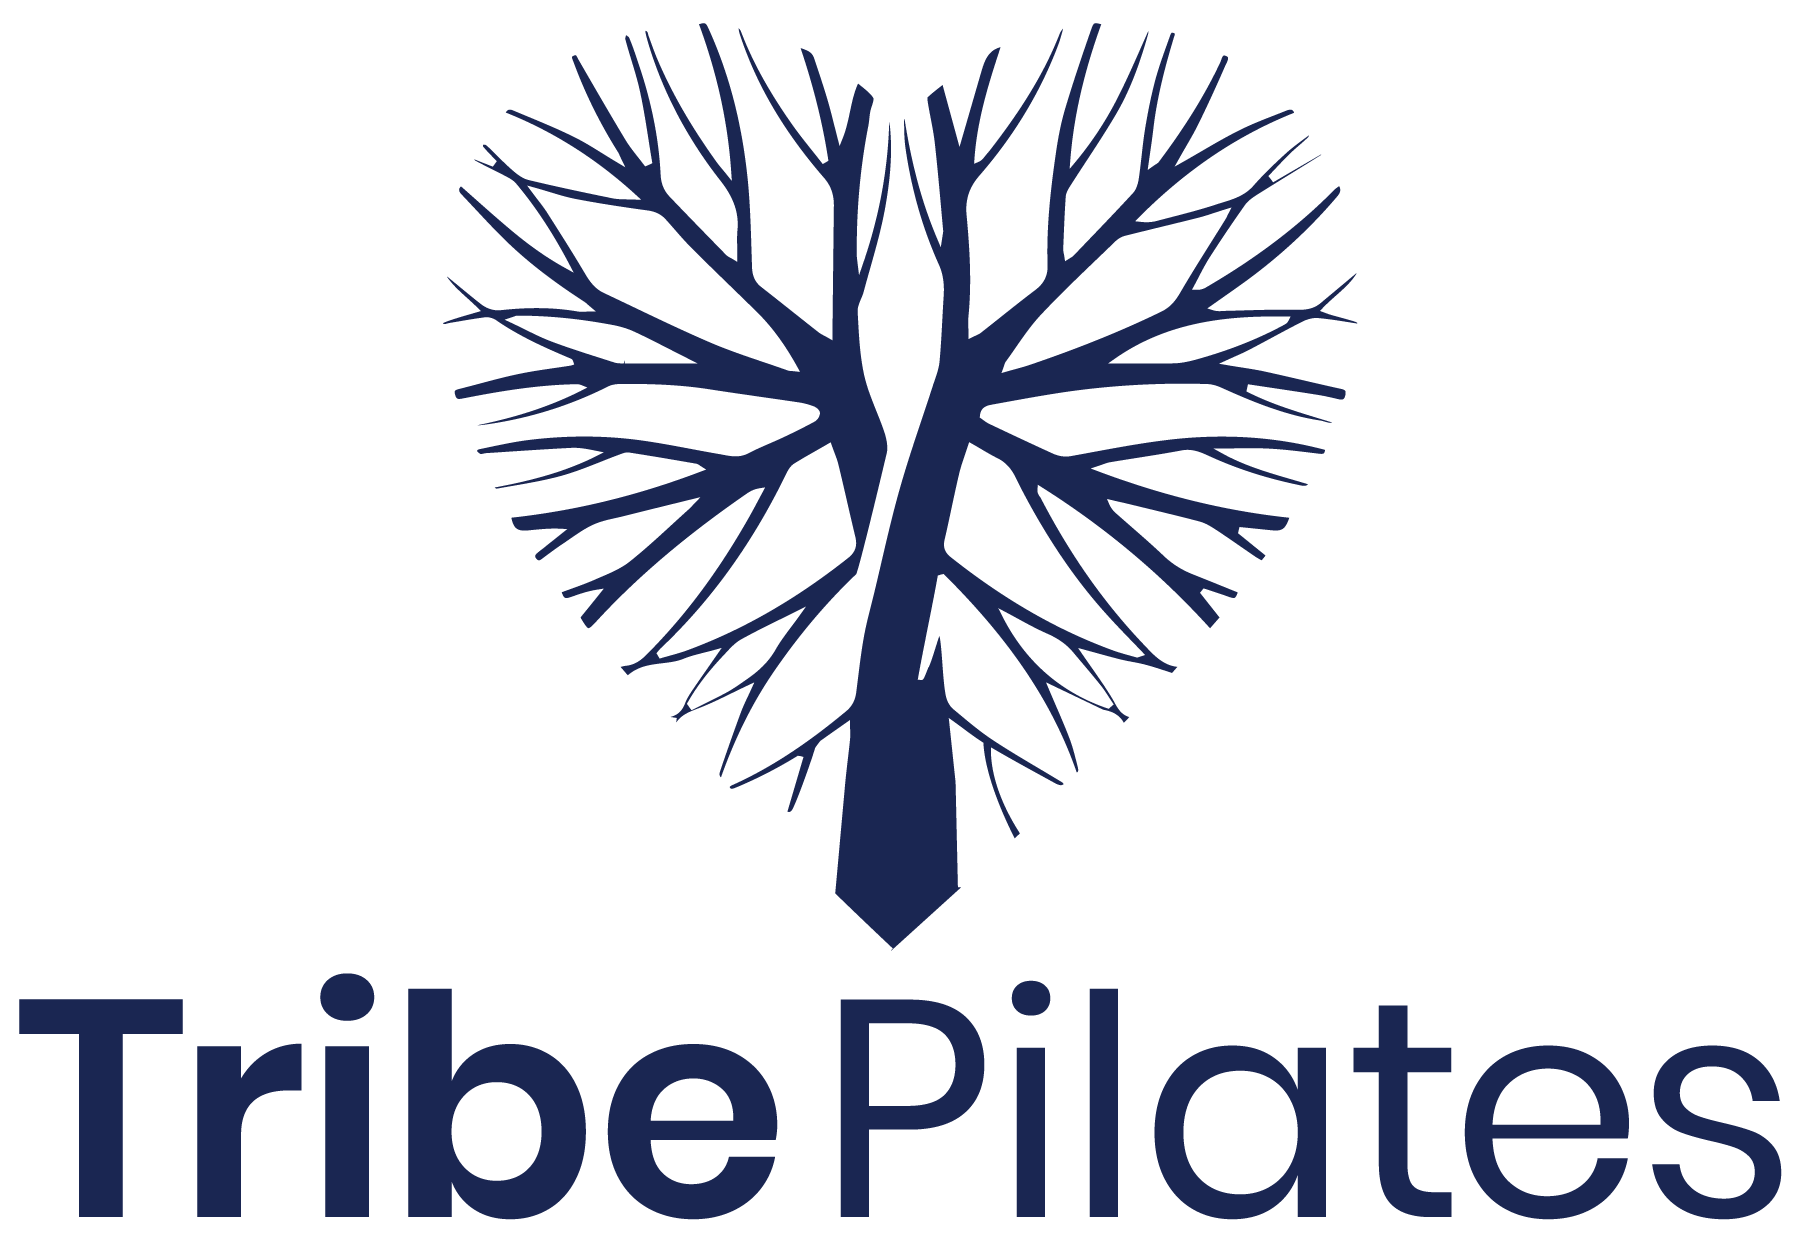 Santa Monica Pilates Studio, Tribe Pilates is Hosting Live Pilates Workouts That Anyone Can Join and Participate In